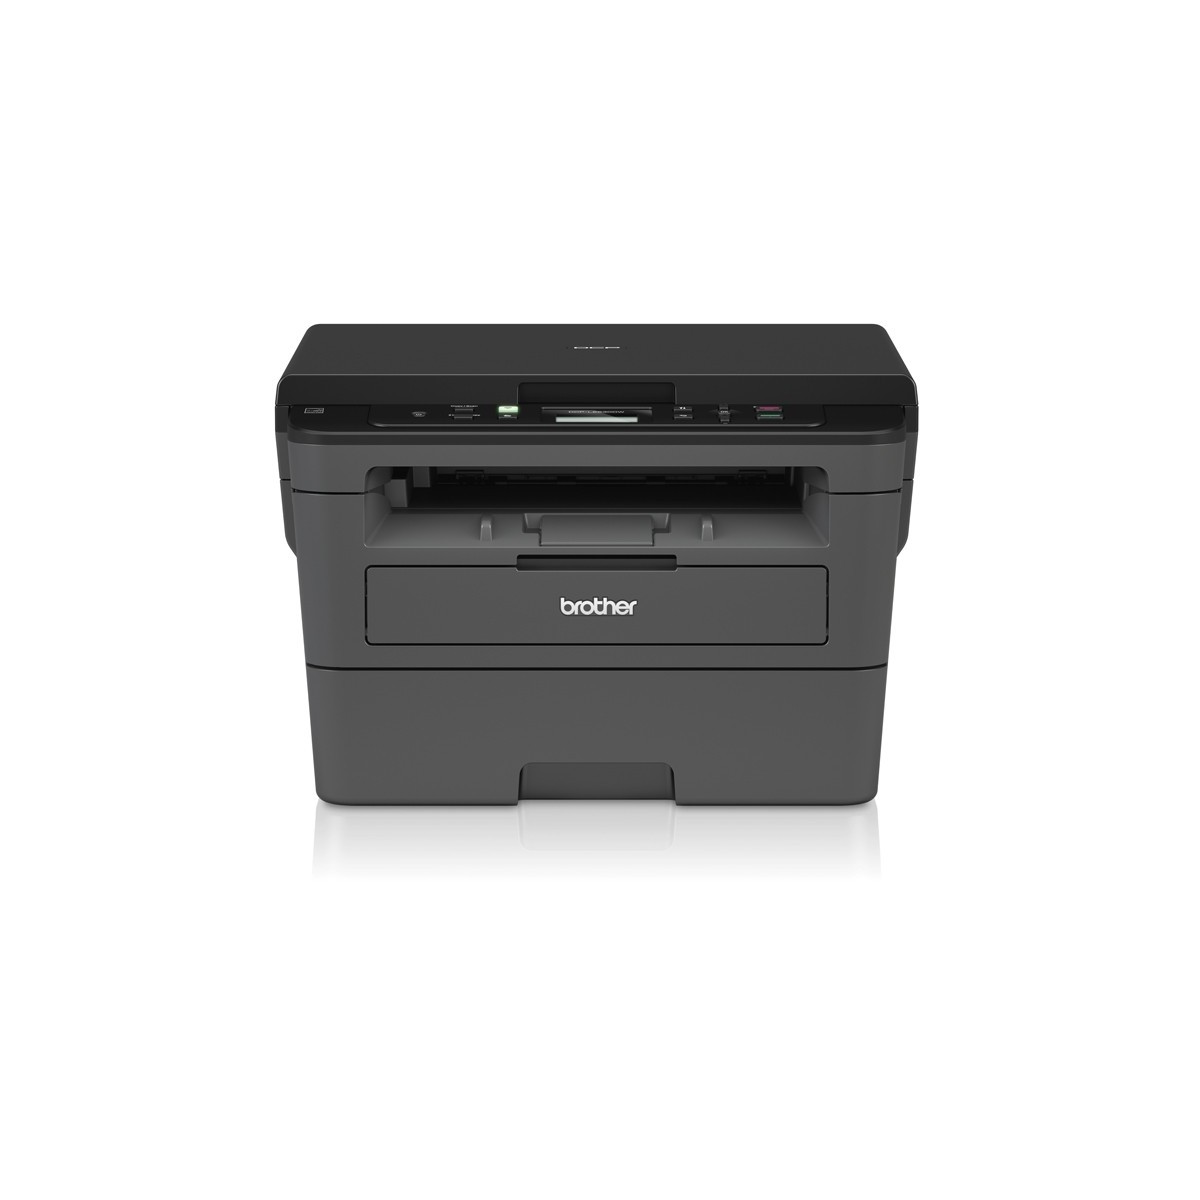 Brother DCP-L2530DW Mono Laser AIO - Printer - Laser-Led